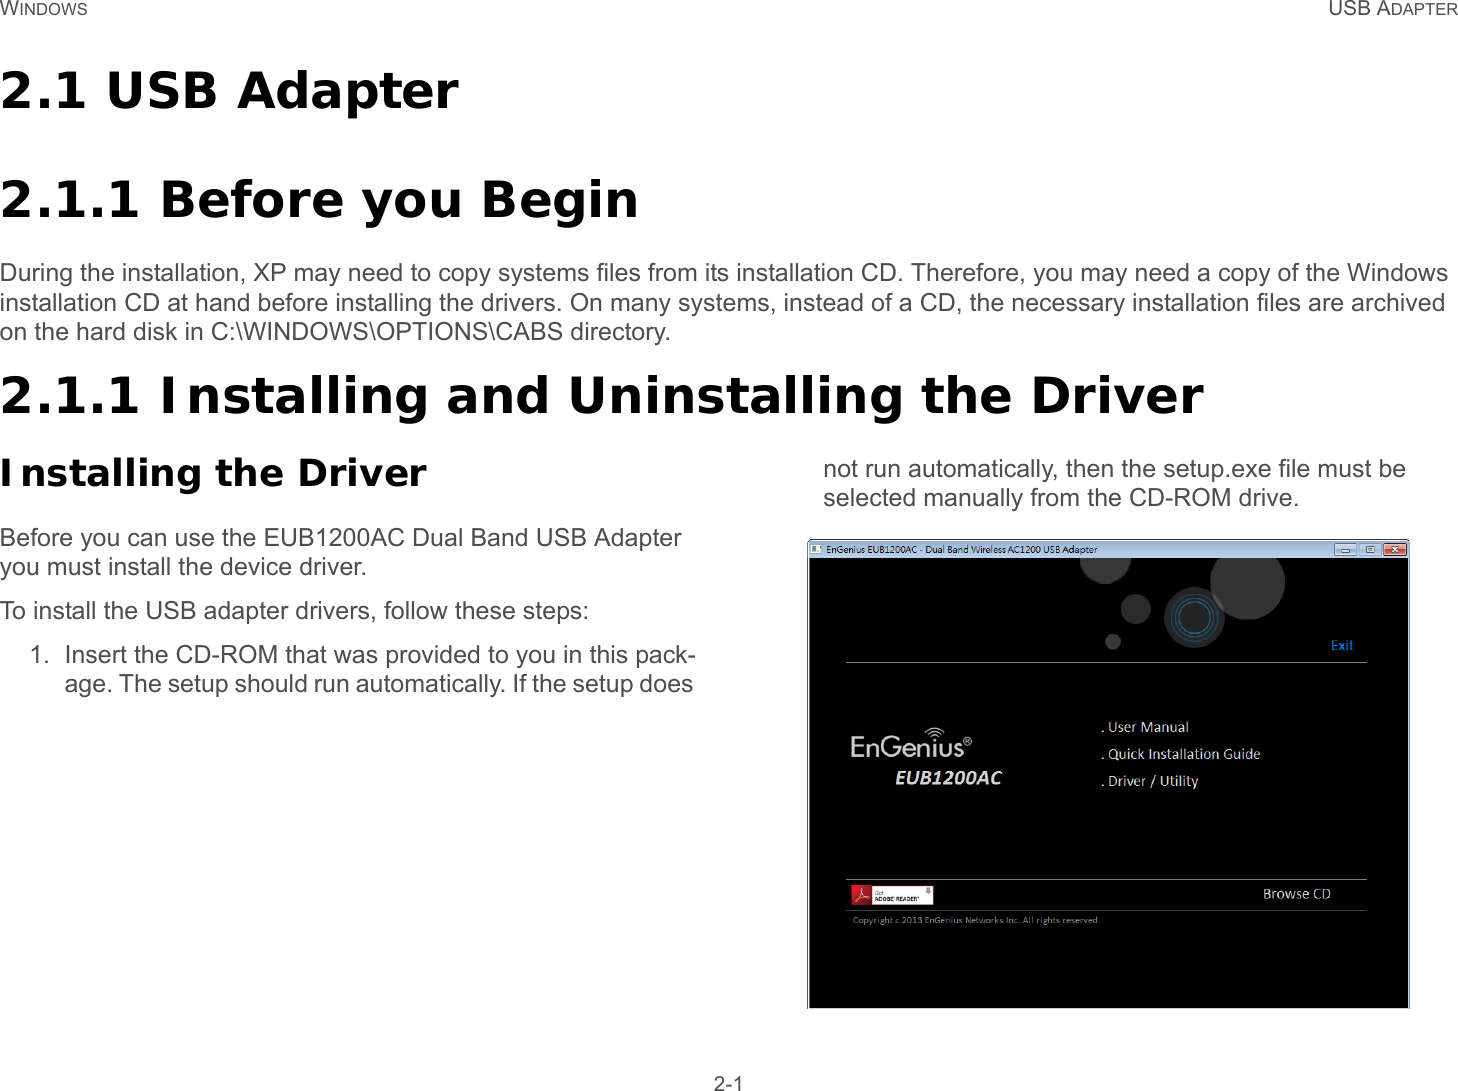 WINDOWS USB ADAPTER 2-12.1 USB Adapter2.1.1 Before you BeginDuring the installation, XP may need to copy systems files from its installation CD. Therefore, you may need a copy of the Windows installation CD at hand before installing the drivers. On many systems, instead of a CD, the necessary installation files are archived on the hard disk in C:\WINDOWS\OPTIONS\CABS directory.2.1.1 Installing and Uninstalling the DriverInstalling the DriverBefore you can use the EUB1200AC Dual Band USB Adapter you must install the device driver.To install the USB adapter drivers, follow these steps:1. Insert the CD-ROM that was provided to you in this pack-age. The setup should run automatically. If the setup does not run automatically, then the setup.exe file must be selected manually from the CD-ROM drive. 